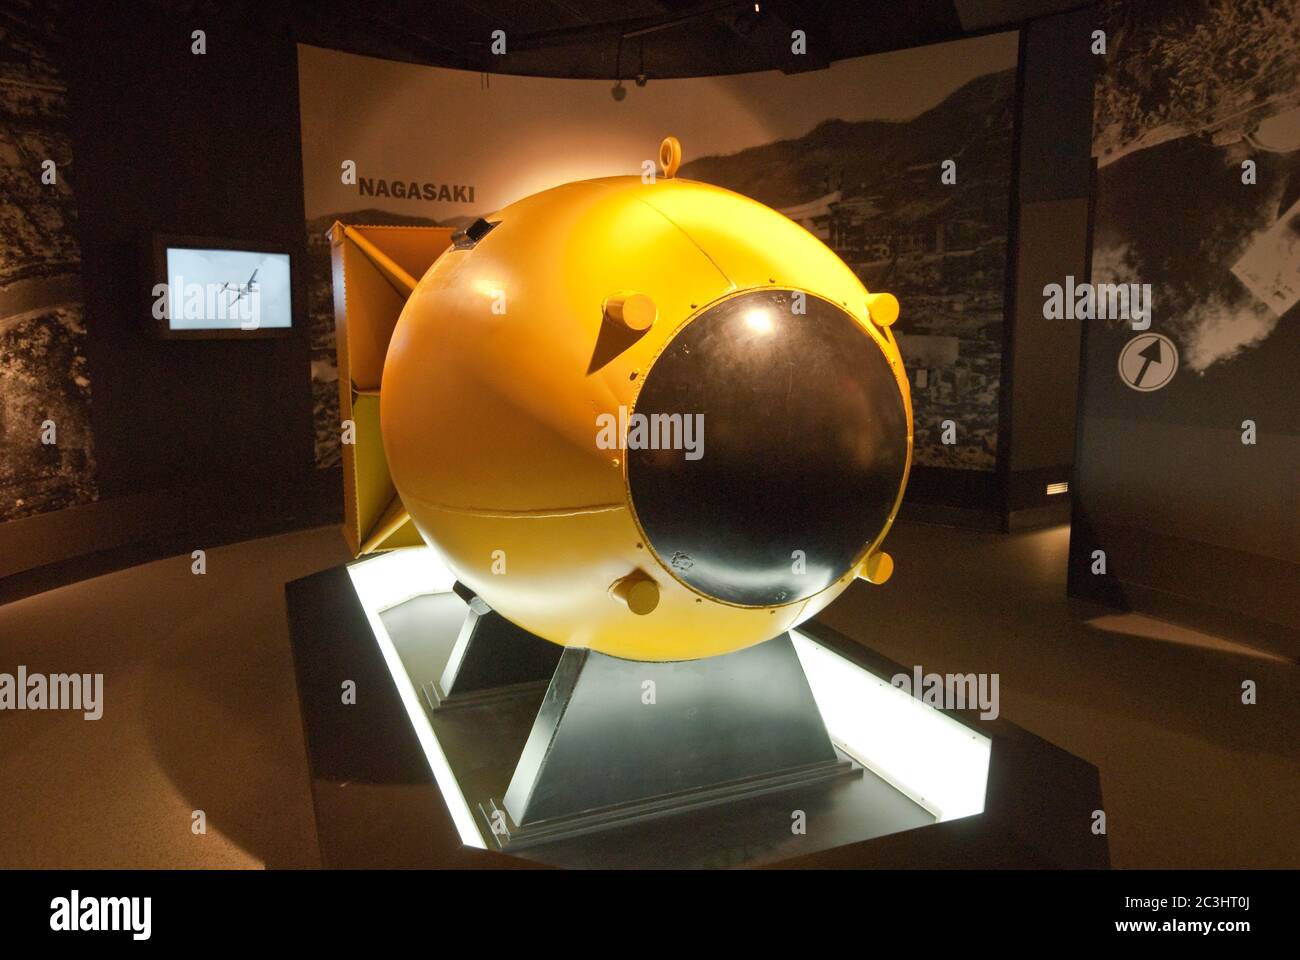 Replica of Fat Man atomic bomb, detonated over Nagasaki, displayed at George H W Bush Gallery at National Museum of the Pacific War in Fredericksburg, Texas, USA Stock Photo